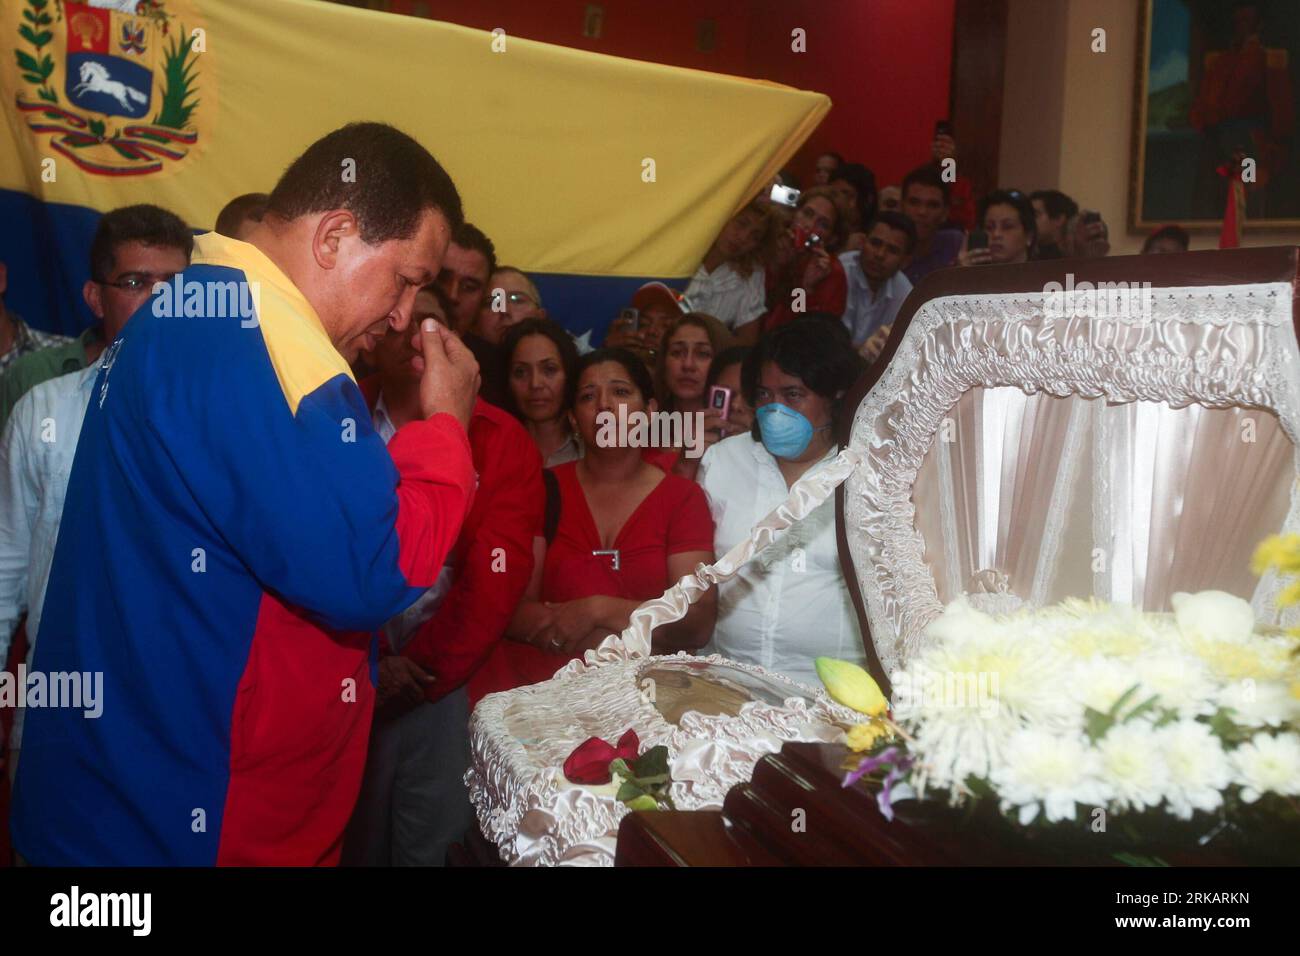 Bildnummer: 54420323  Datum: 11.09.2010  Copyright: imago/Xinhua GUARICO, Sept. 12, 2010 (Xinhua) -- Venezuelan President Hugo Chavez attends the memorial service for William Lara, who was governor of Guarico and an important official of the ruling United Socialist Party of Venezuela, in San Juan de los Morros, Guarico, Venezuala, Sept. 11, 2010. William Lara was found dead by drowning on Friday. (Xinhua/Ernandez) (lyx) VENEZUELA-GUARICO-WILLIAM LARA-DEATH PUBLICATIONxNOTxINxCHN Gesellschaft Politik Trauer Tot Beerdigung People kbdig xdp 2010 quer premiumd xint    Bildnummer 54420323 Date 11 0 Stock Photo